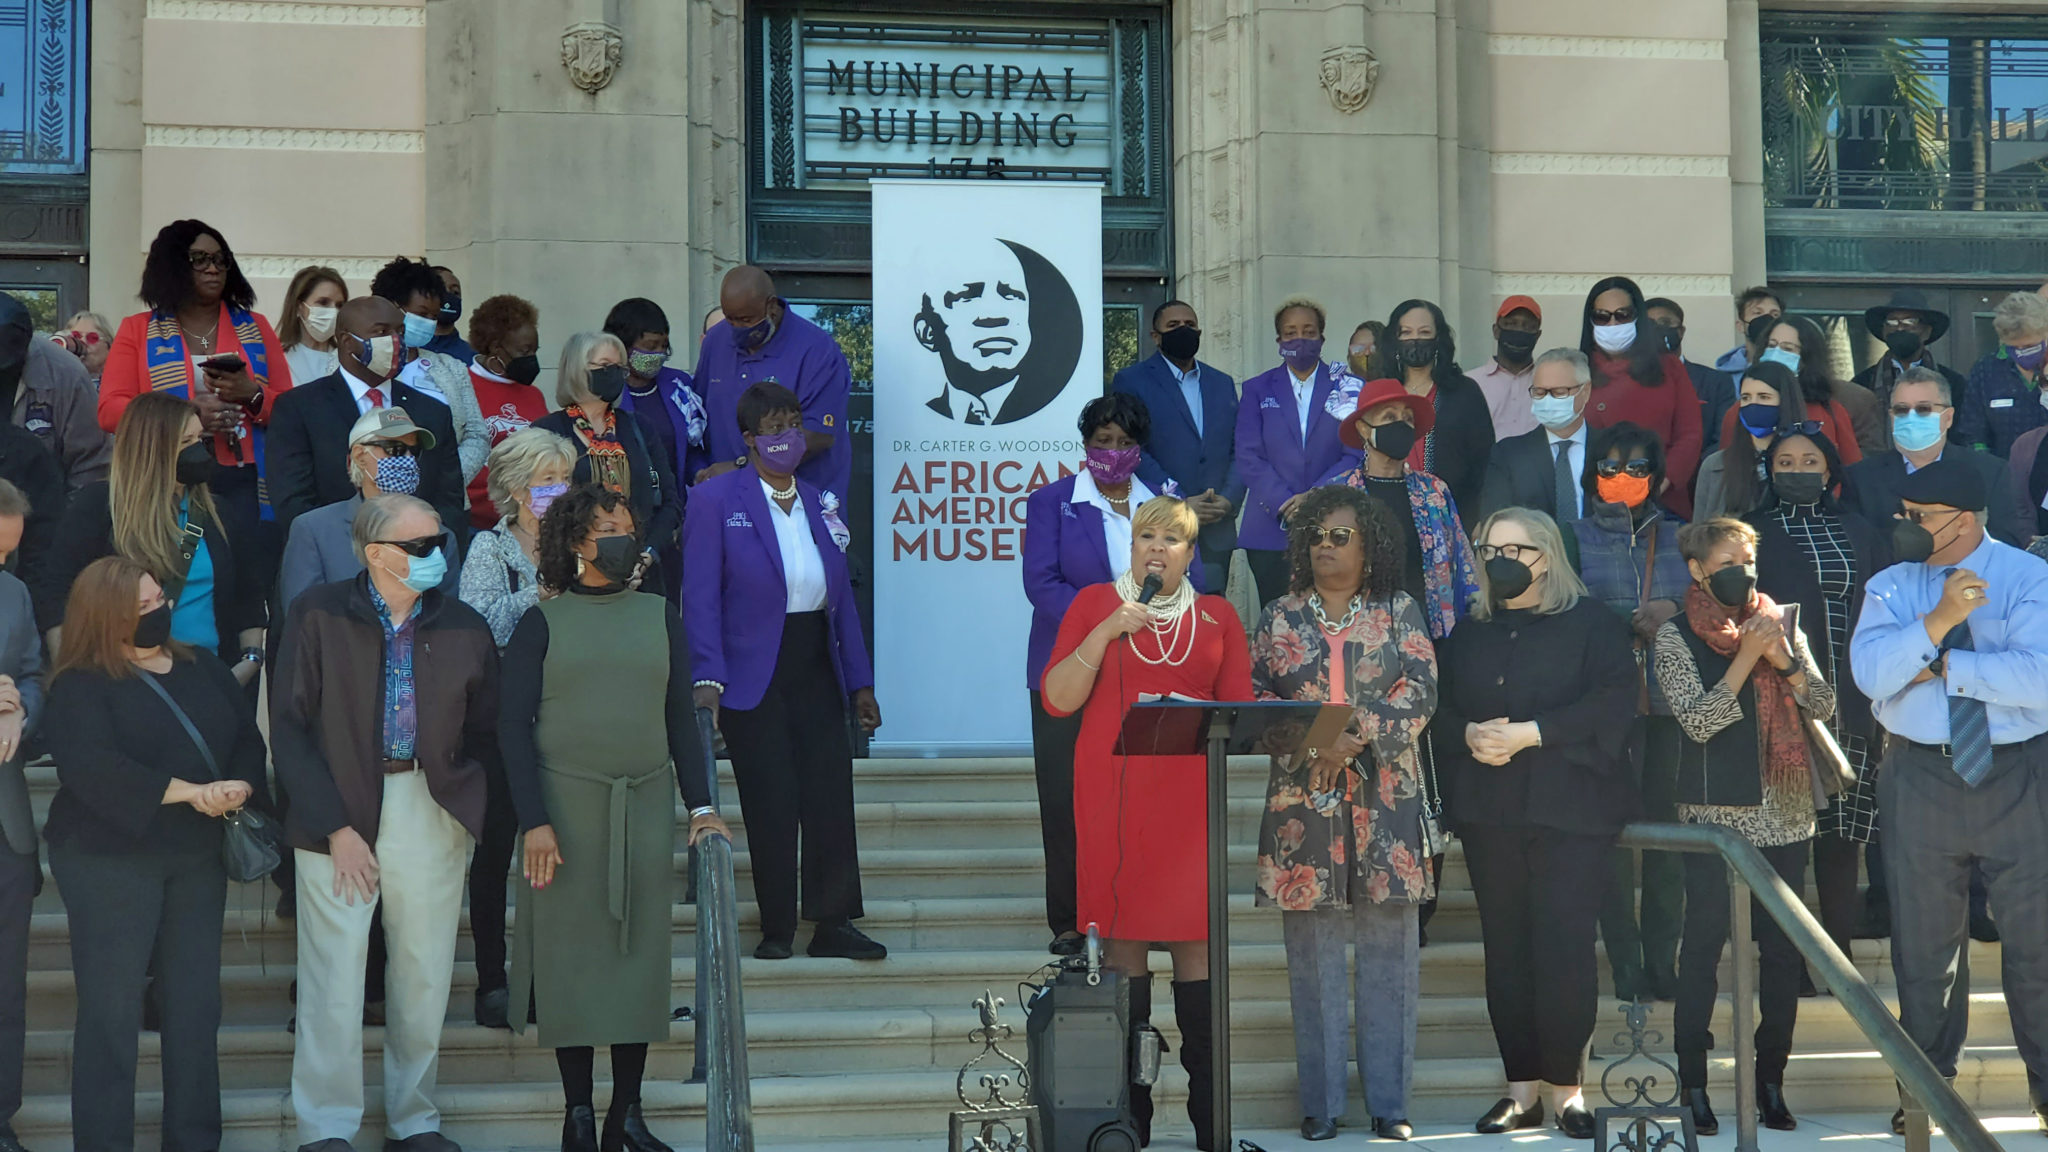 Flanked by donors, sponsors, supporters and members of the City Council, Terri Lipsey Scott, director of the Dr. Carter G. Woodson African American Museum, announced a capital campaign, “Invest in Black History.”